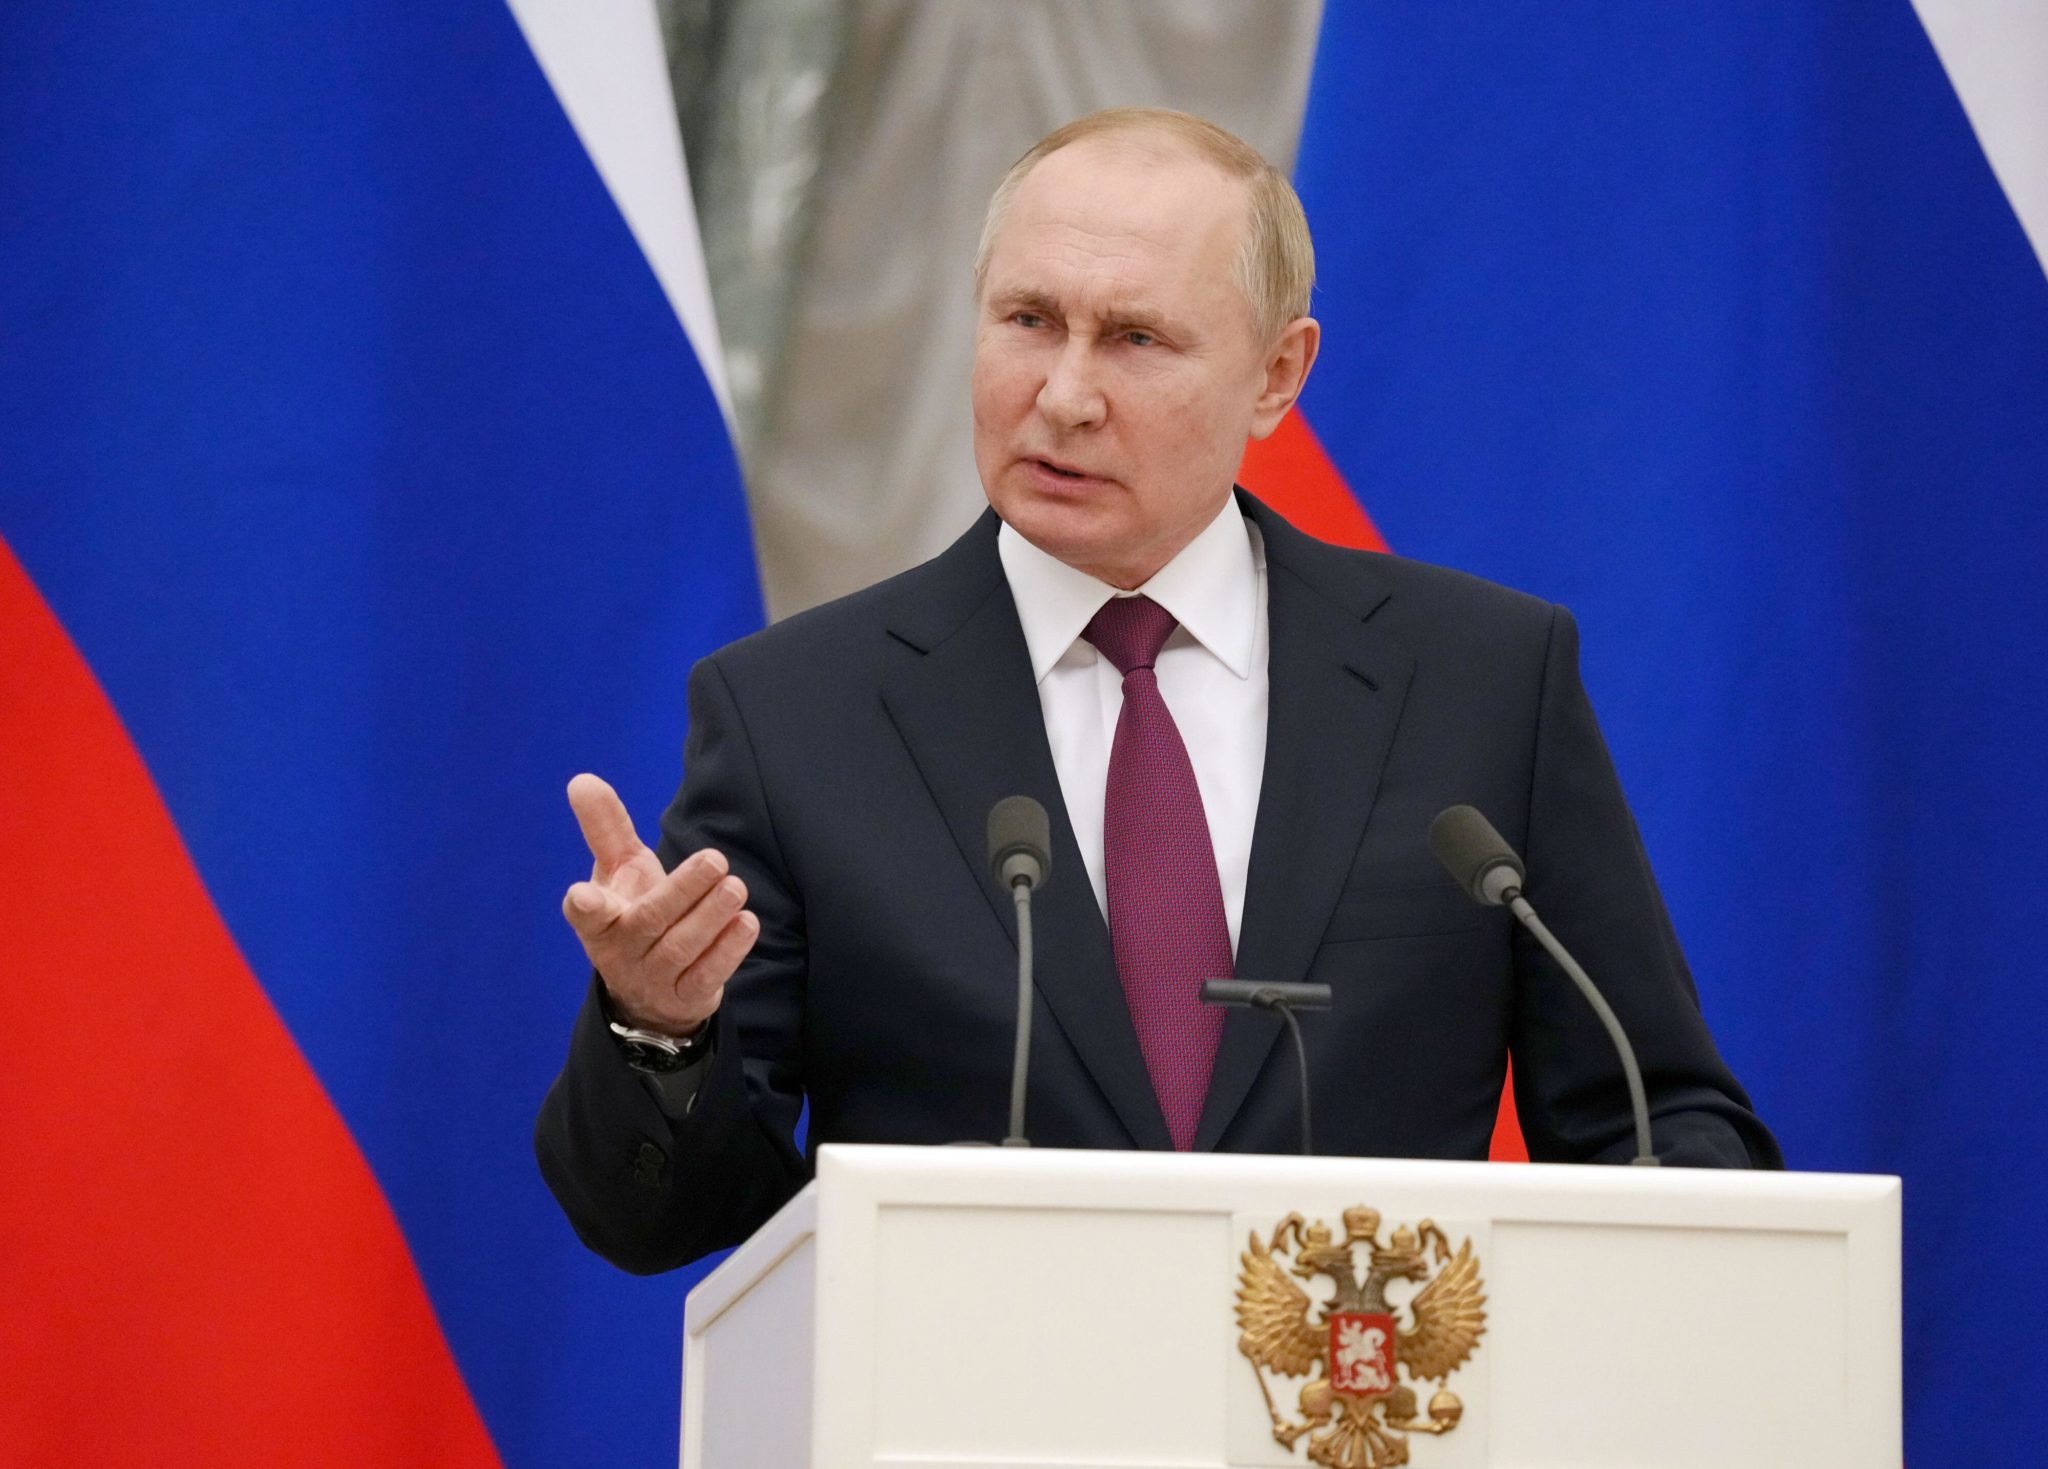 Russian President Vladimir Putin speaks at a press conference in Moscow in February 2022.